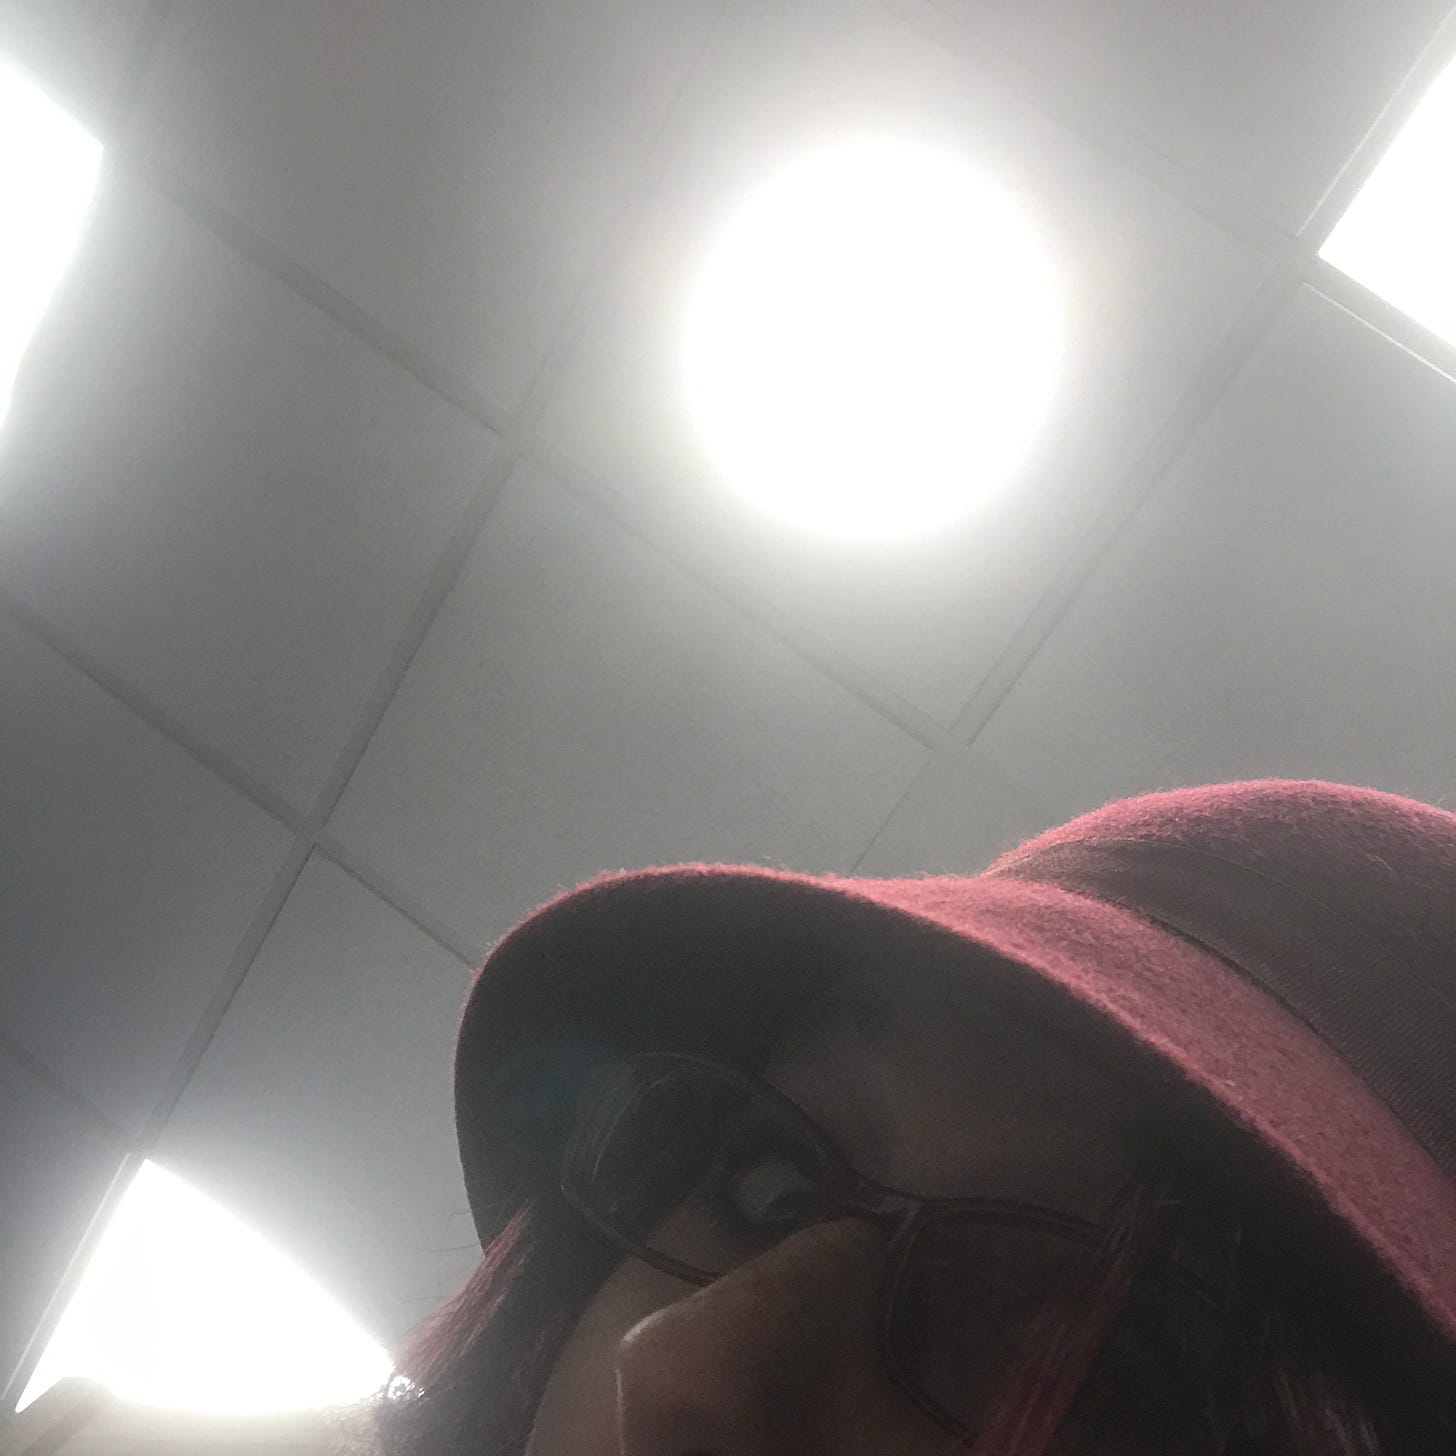 Image of Lyric Rivera, in 2017, taking a selfie with a painfully bright light. They have a red felt had on, shading their face.